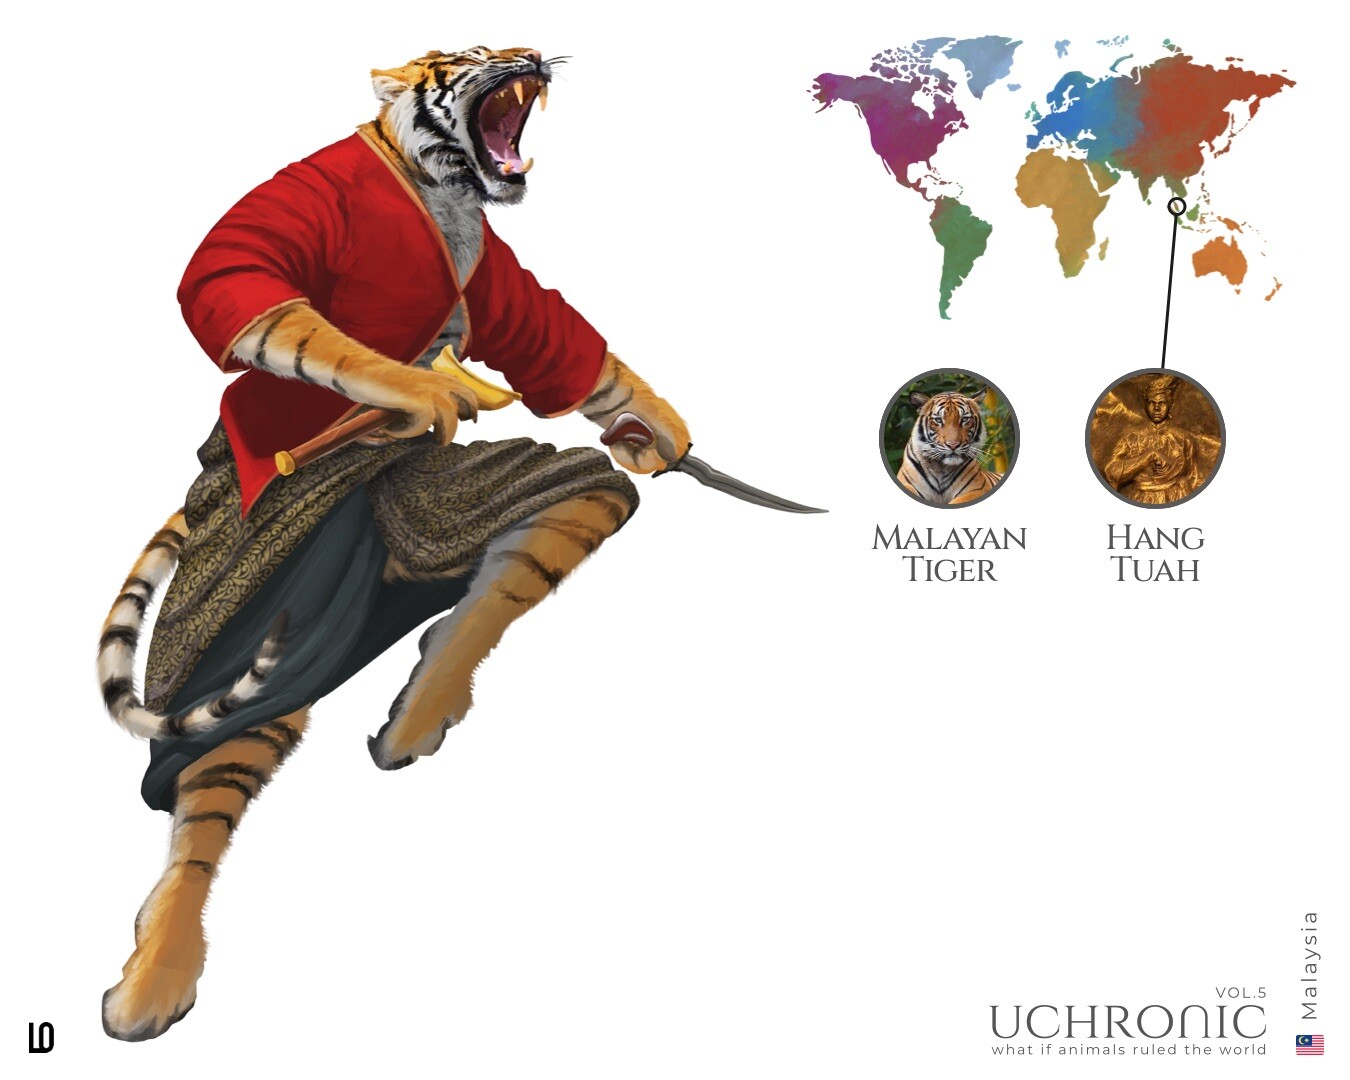 Malaysia , Huang Tuah was a legendary hero, the most powerful of the lakmasana (admirals) and considered the greatest Silat master. To represent him I take the magnificent Malayan Tiger.